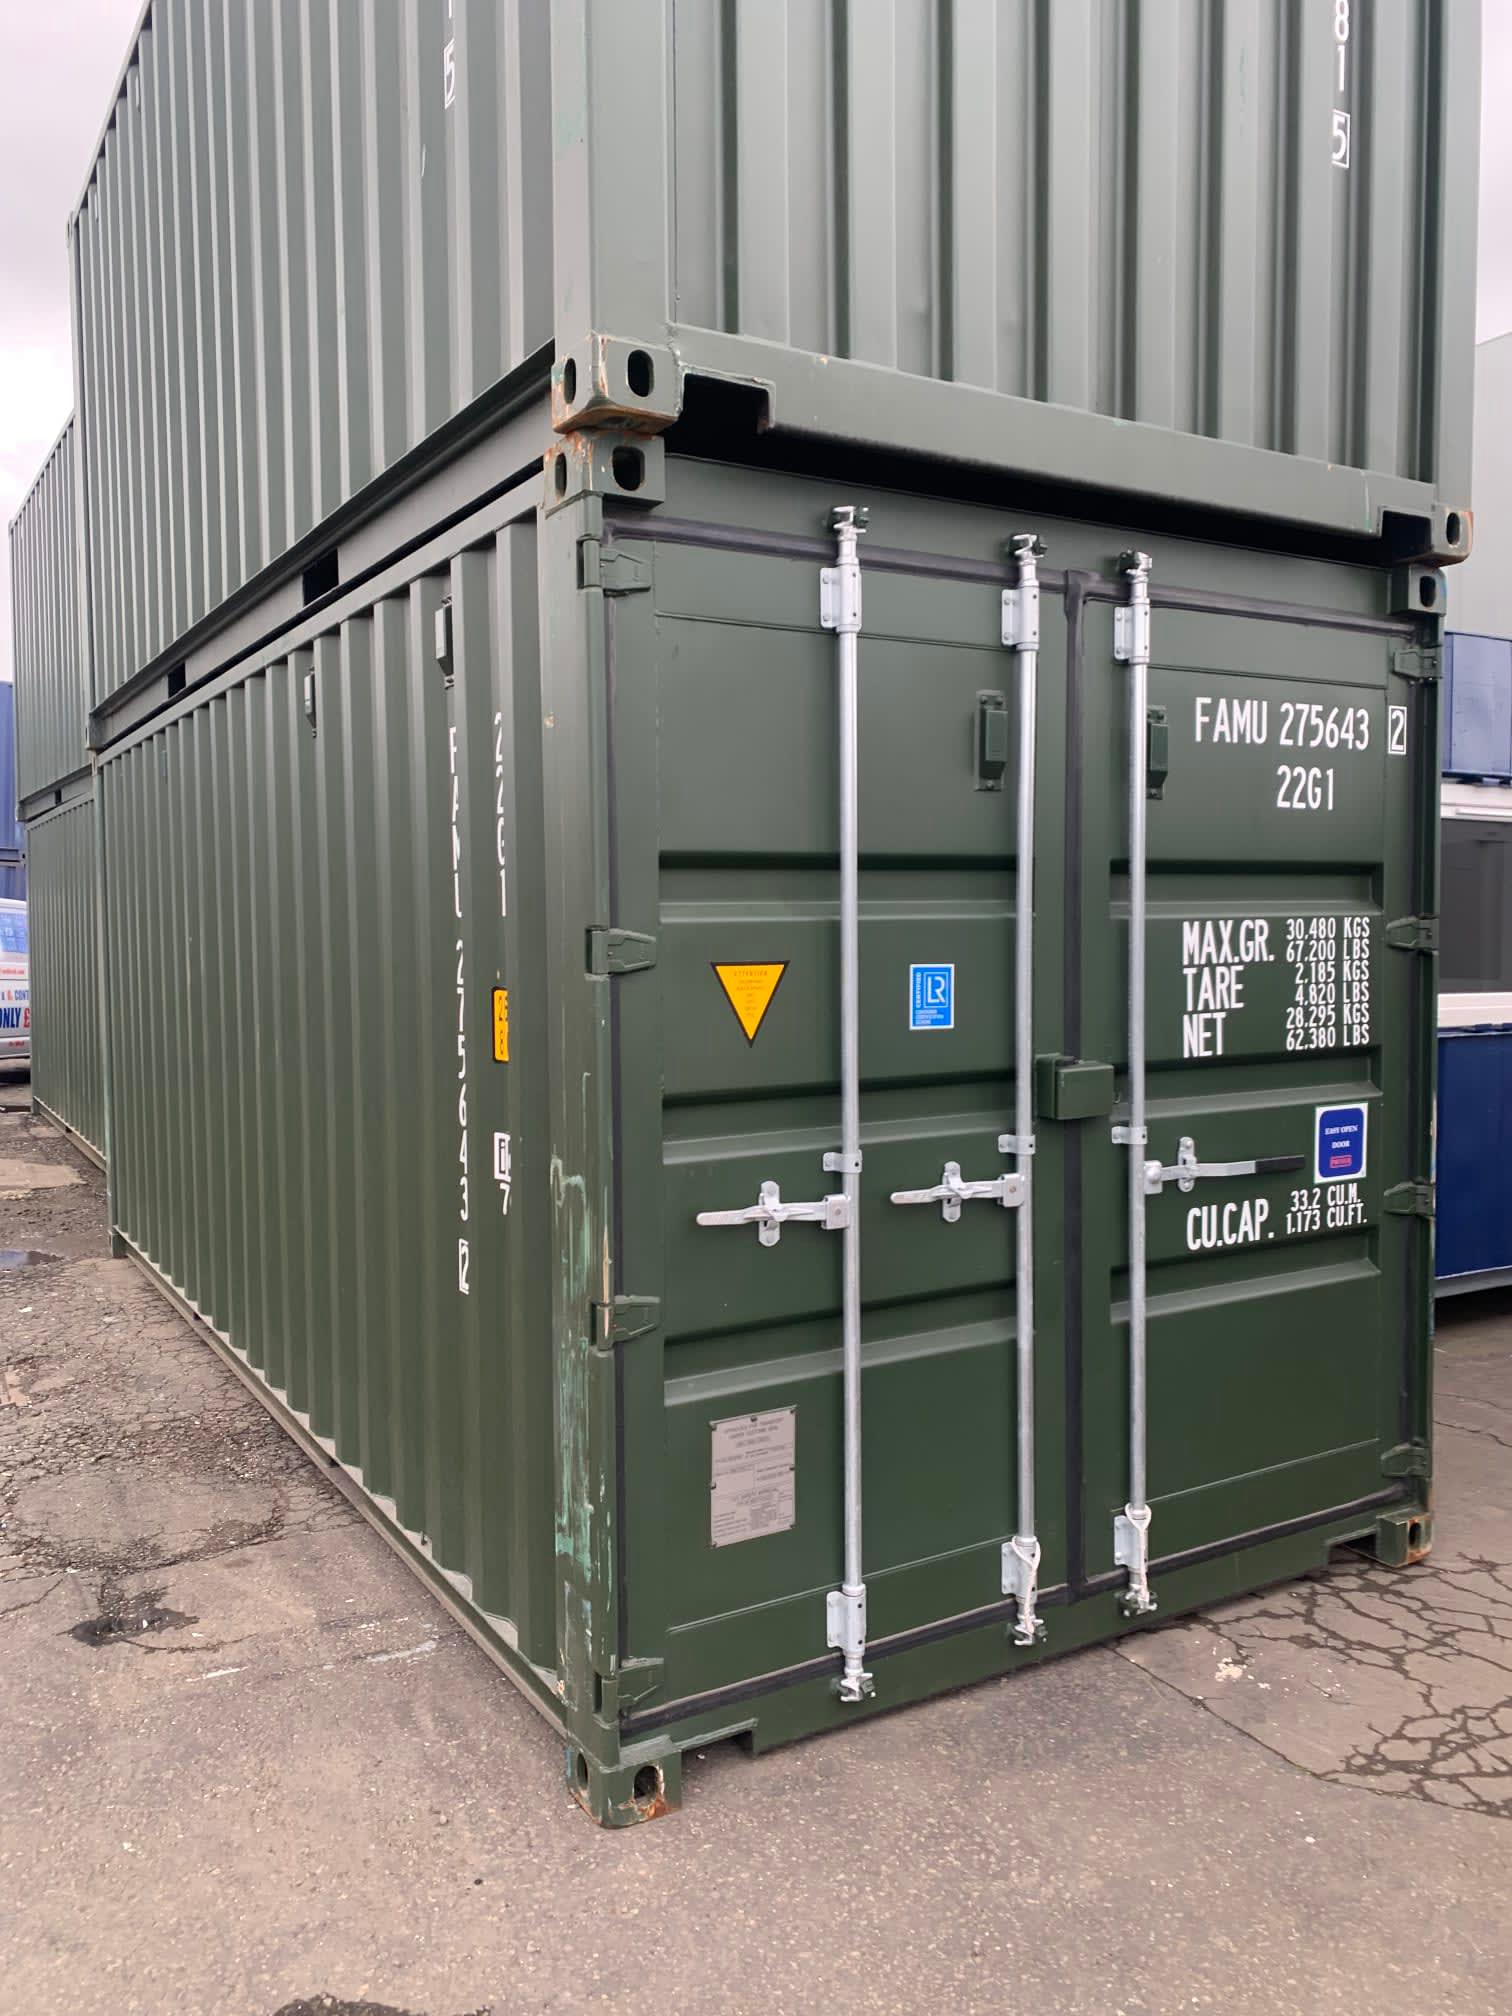 Images Grangemouth Cabins & Containers Ltd